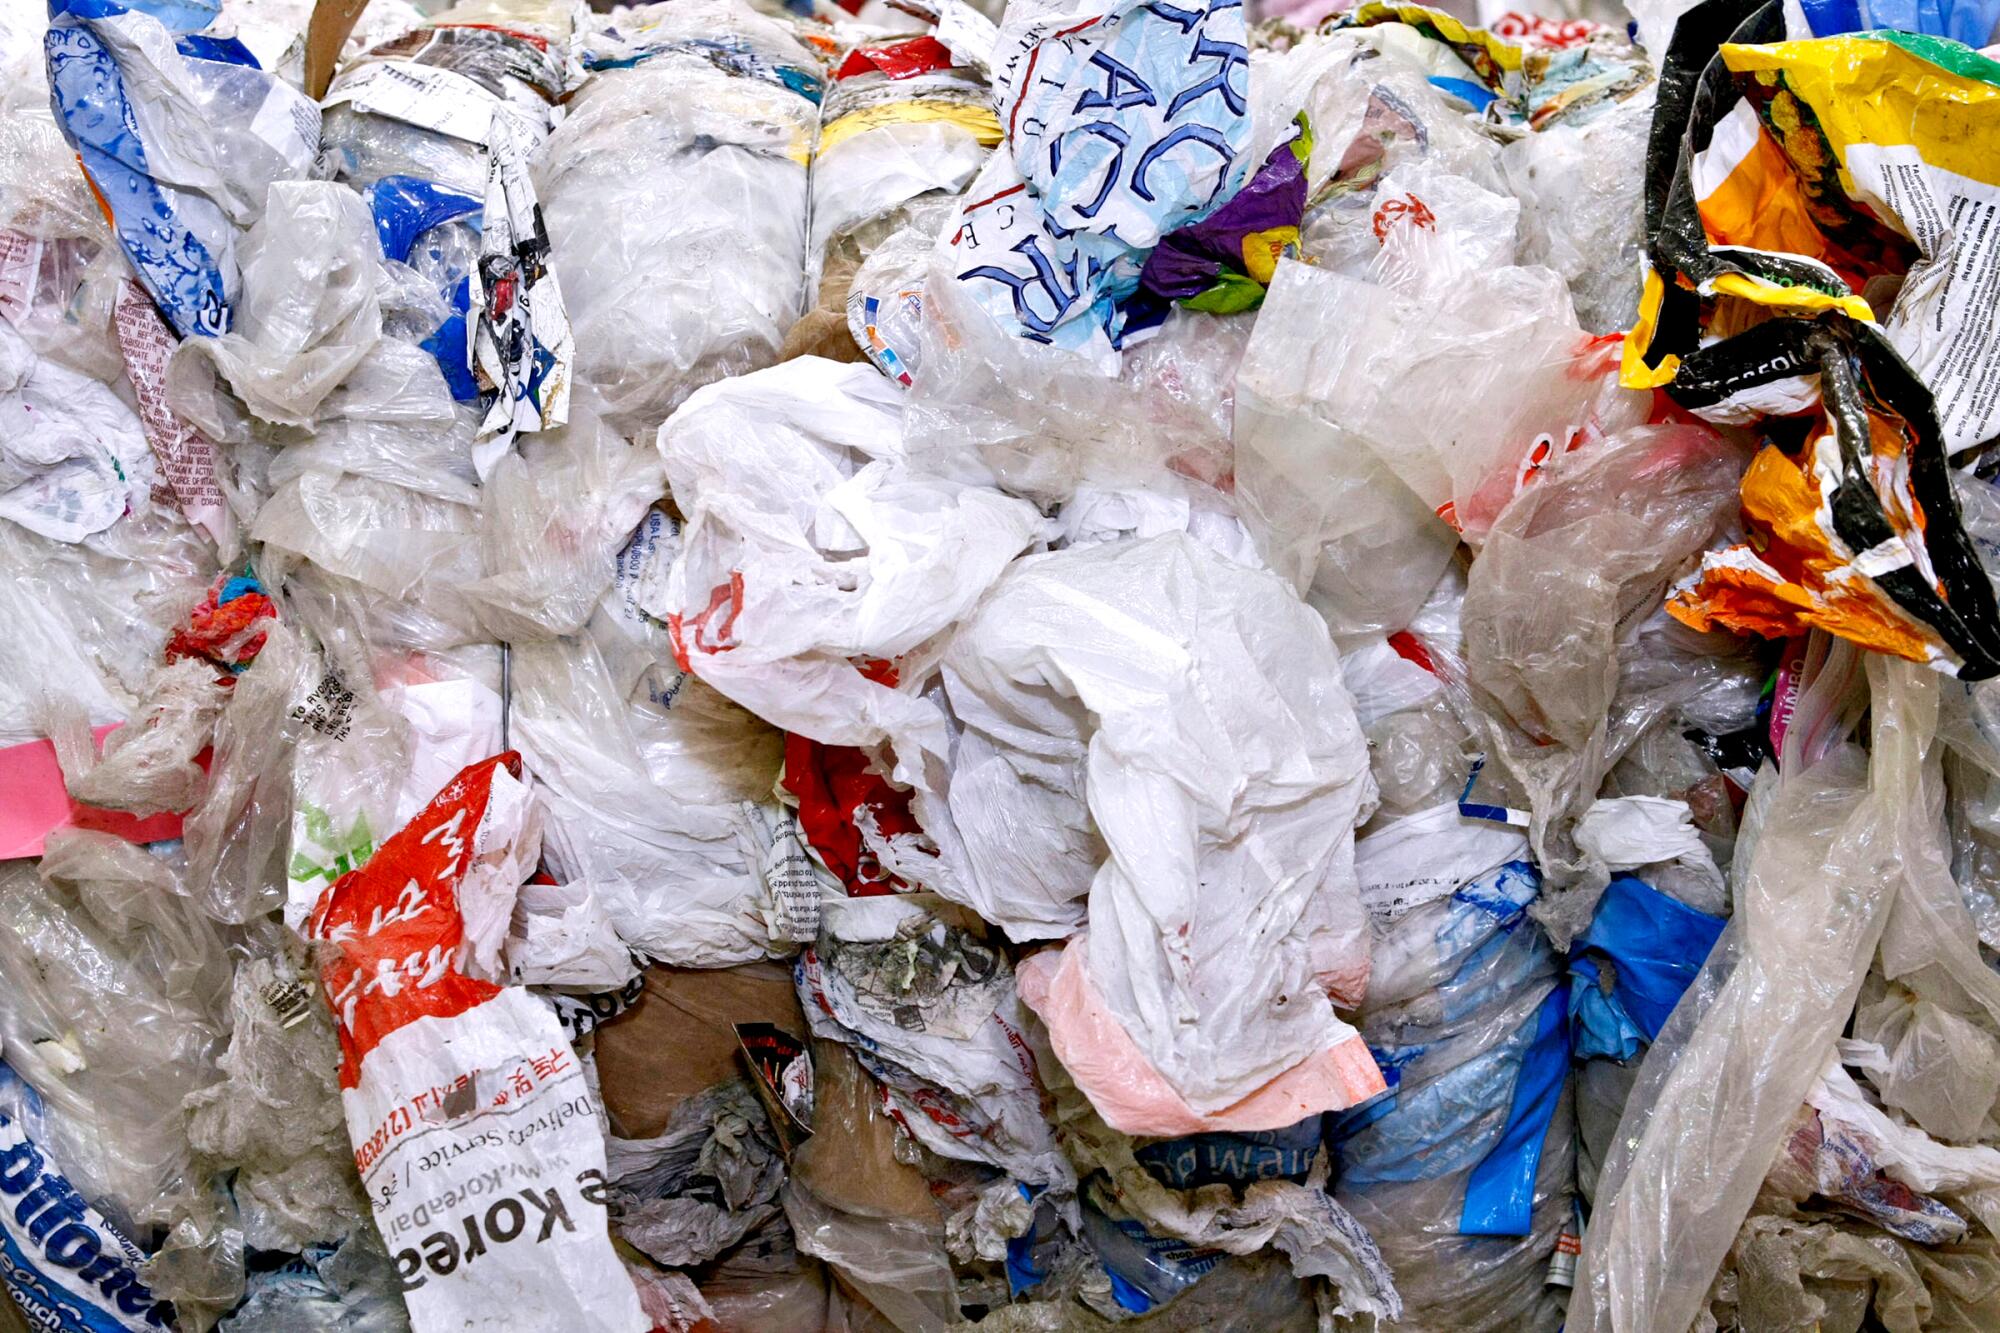 An up-close photo of a bale of plastic bags